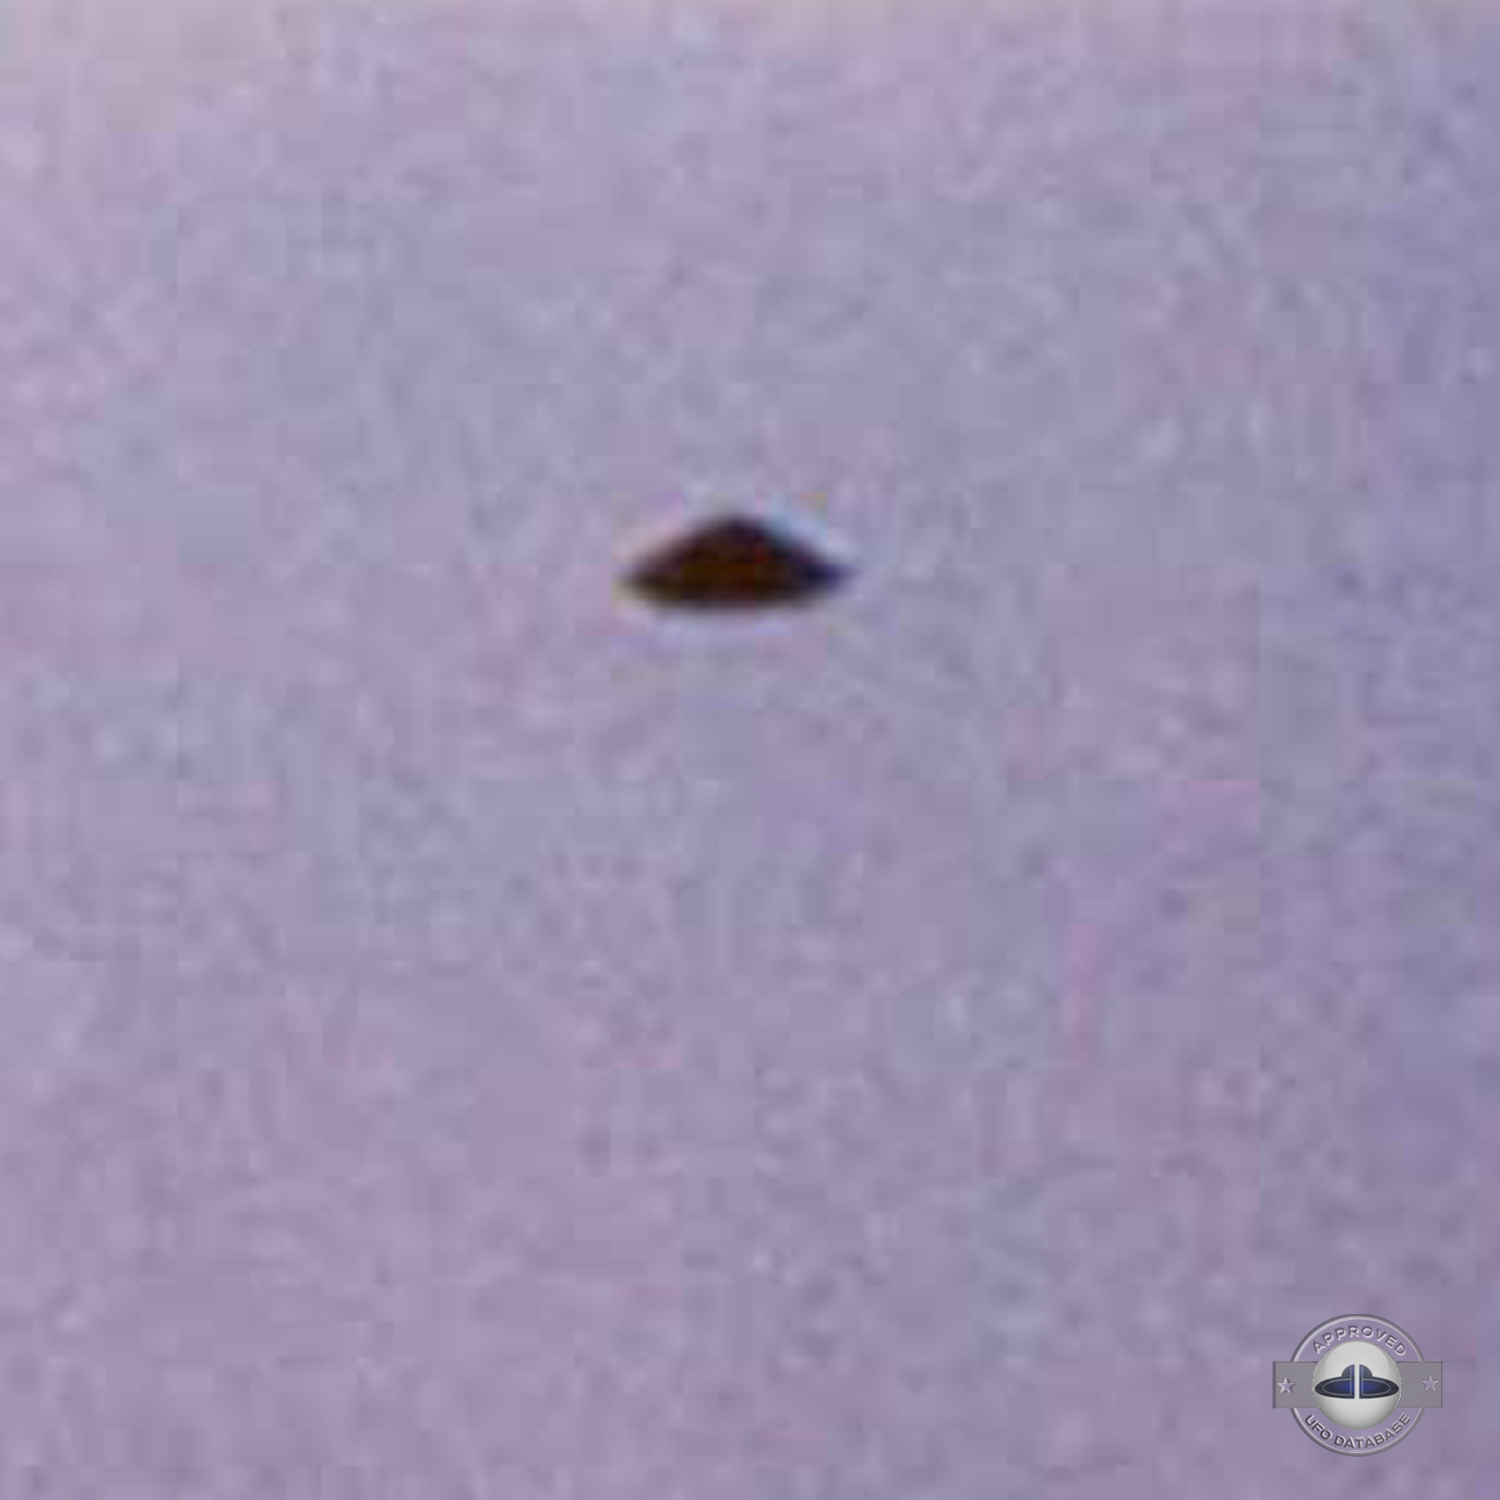 UFO seen over a roof of a house in Puerto Madryn in Argentina 1975 UFO Picture #28-3